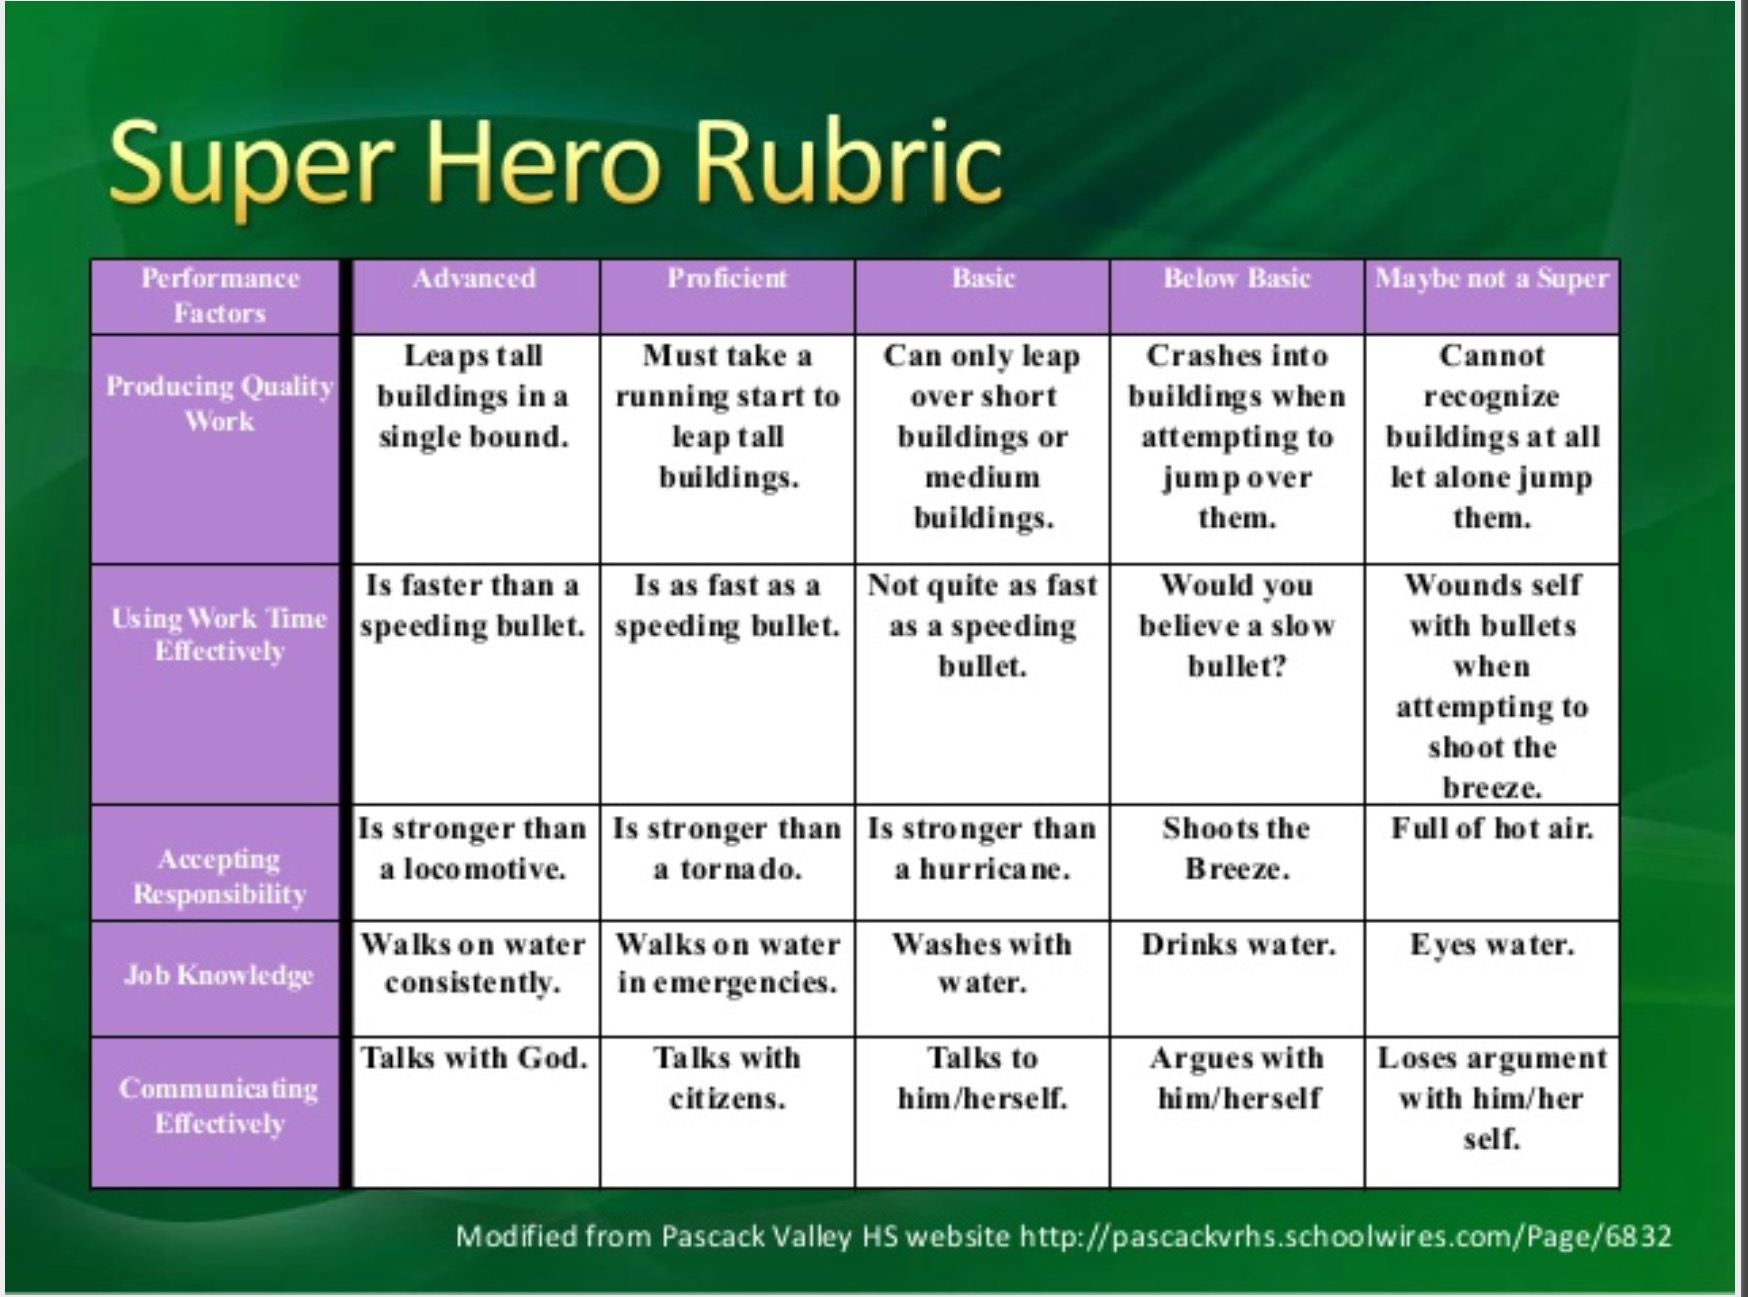 A rubric for becoming a superhero -- based on Supermans's powers.